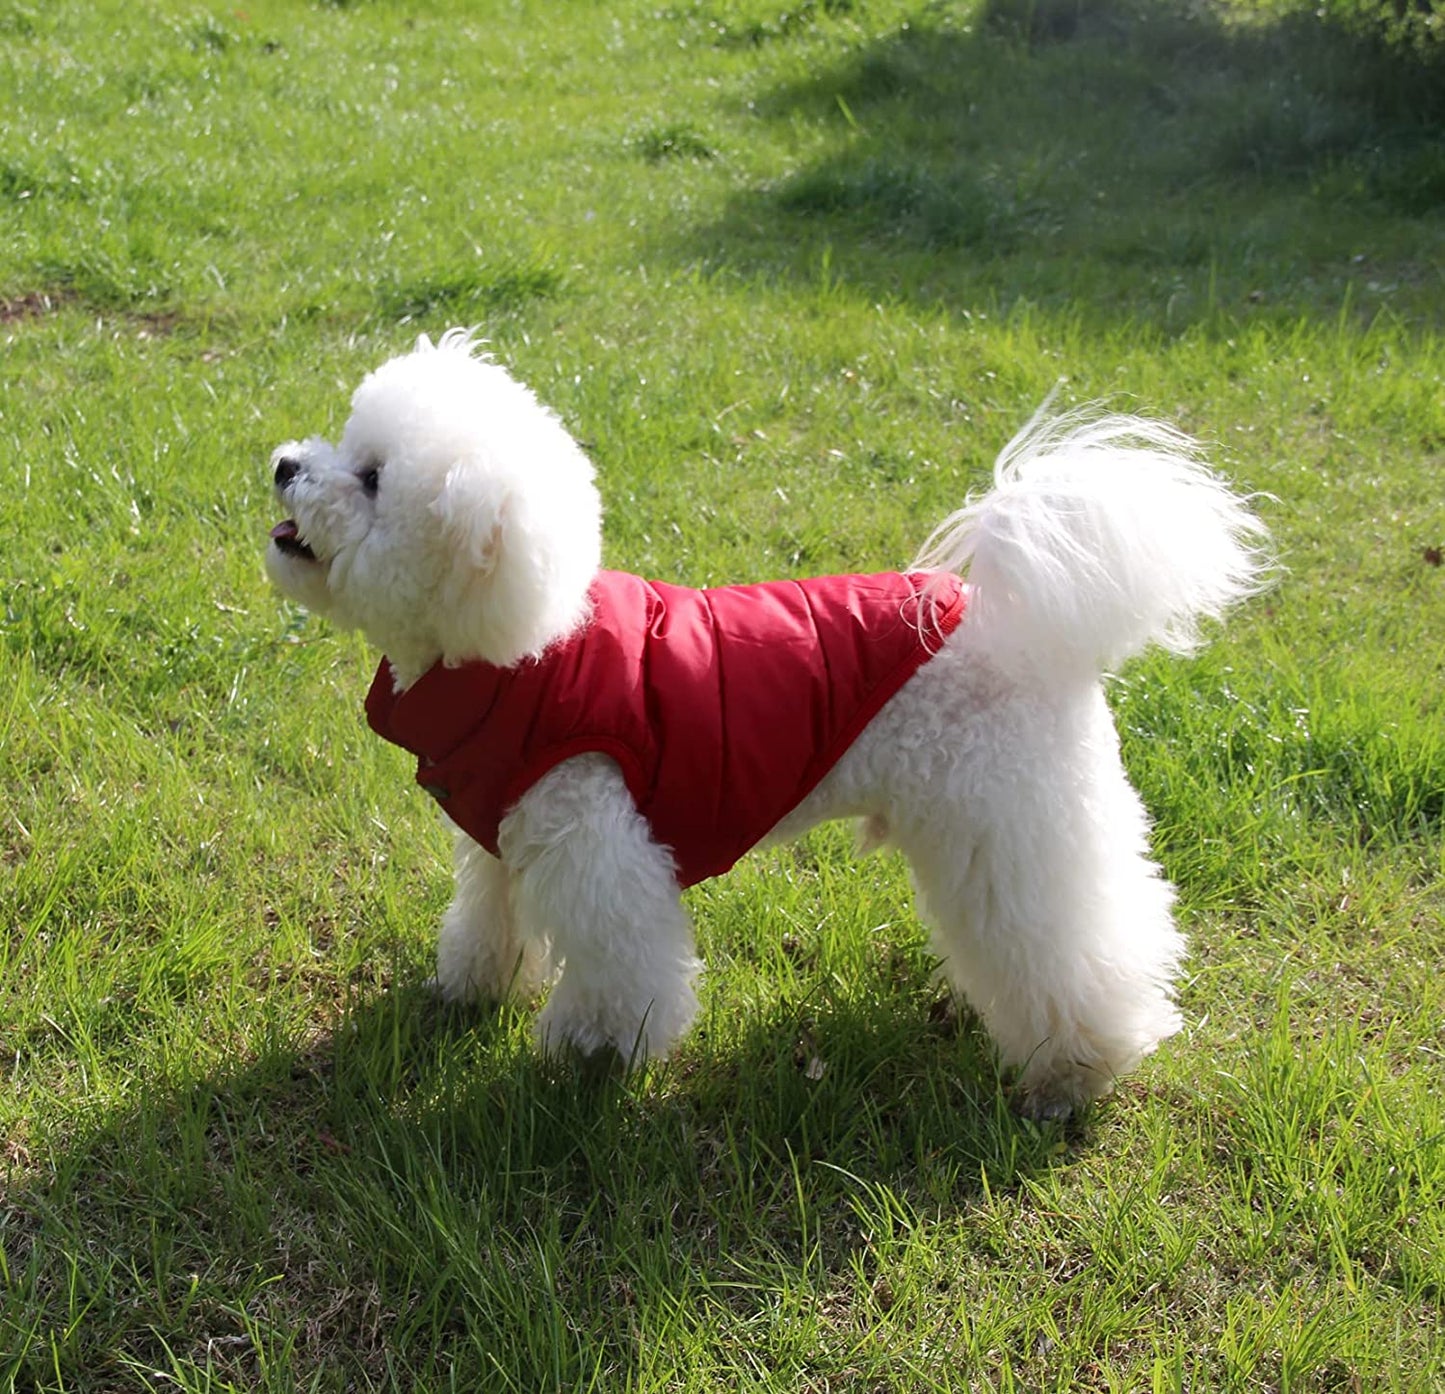 2 Layers Fleece Lined Warm Dog Jacket for Puppy Winter Cold Weather,Soft Windproof Small Dog Coat,Red XS